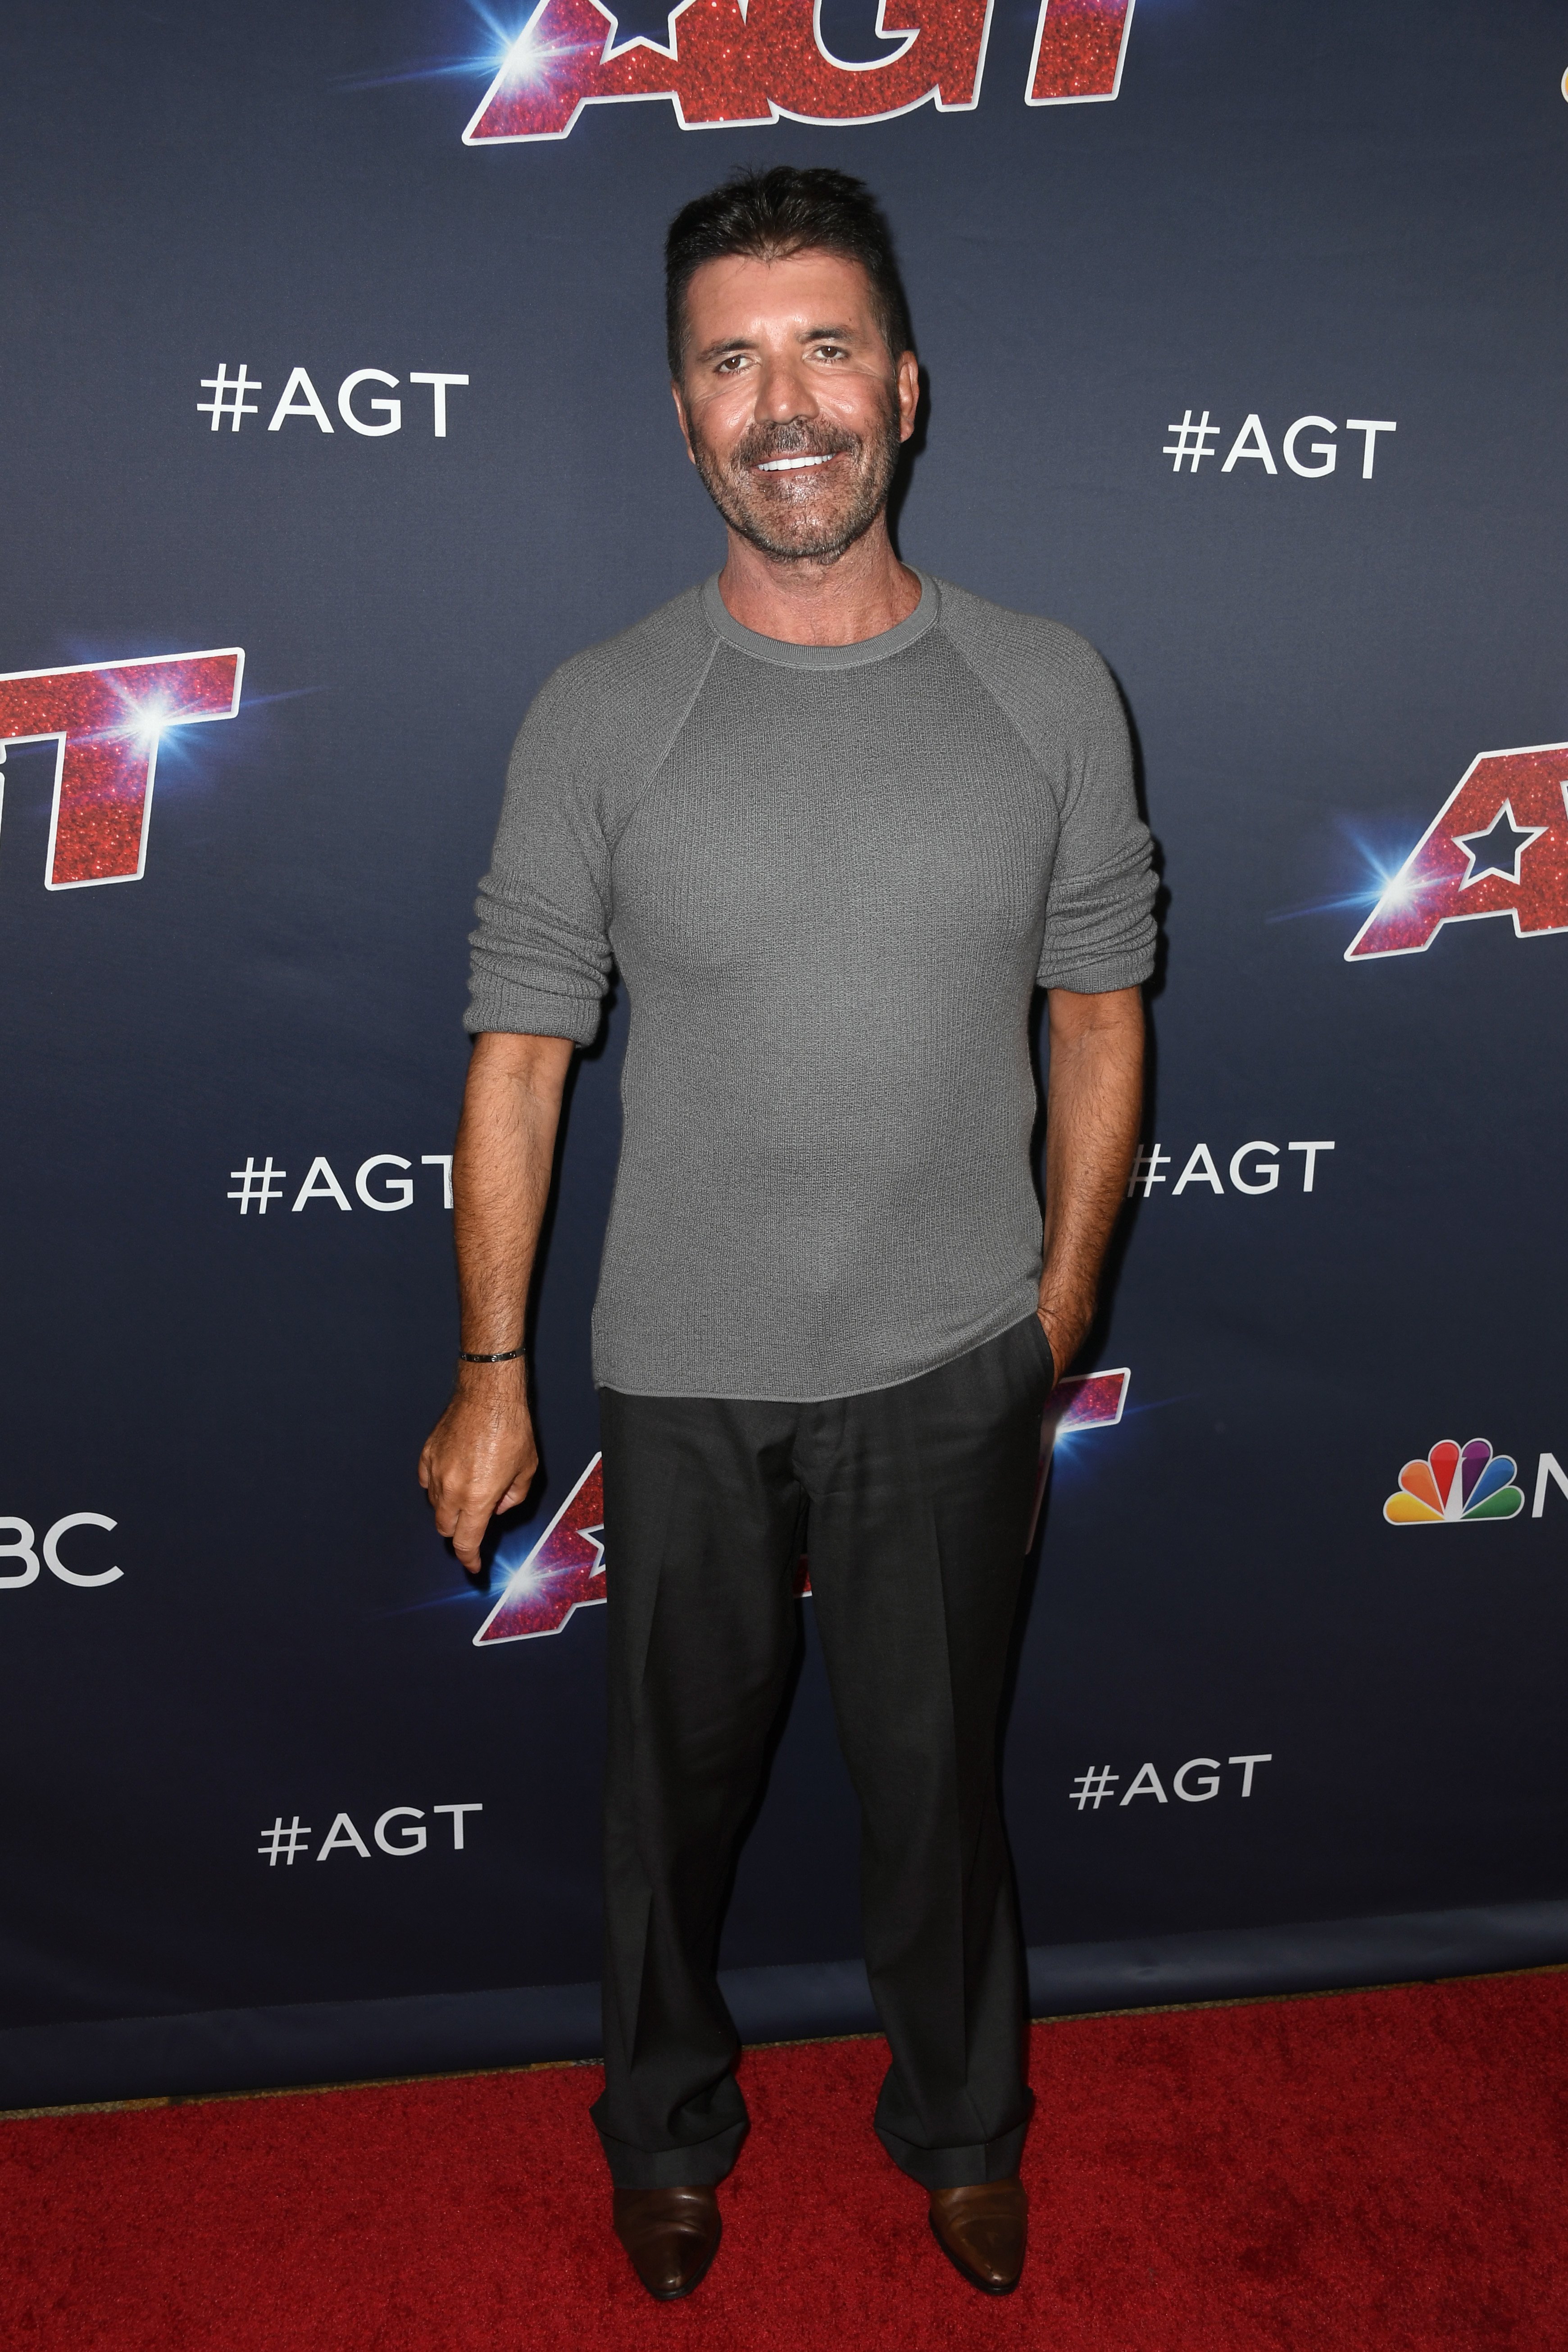 Simon Cowell at the live show of "America's Got Talent" Season 14 in August 2019. | Photo: Getty Images